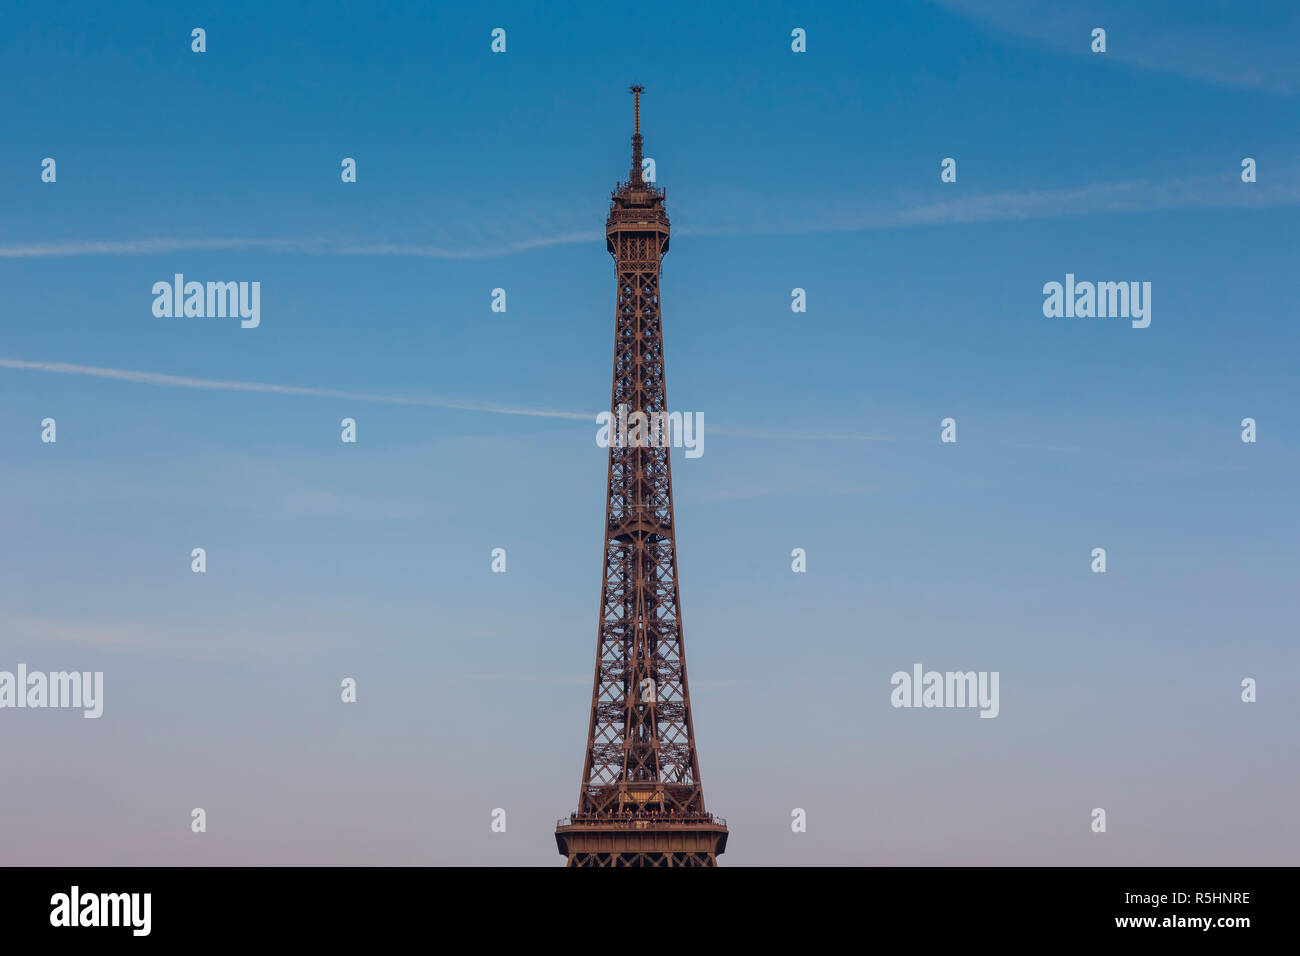 Eiffel Tower, a wrought-iron lattice tower on the Champ de Mars in Paris, France, photographed from the second level and above at the golden hour. Stock Photo